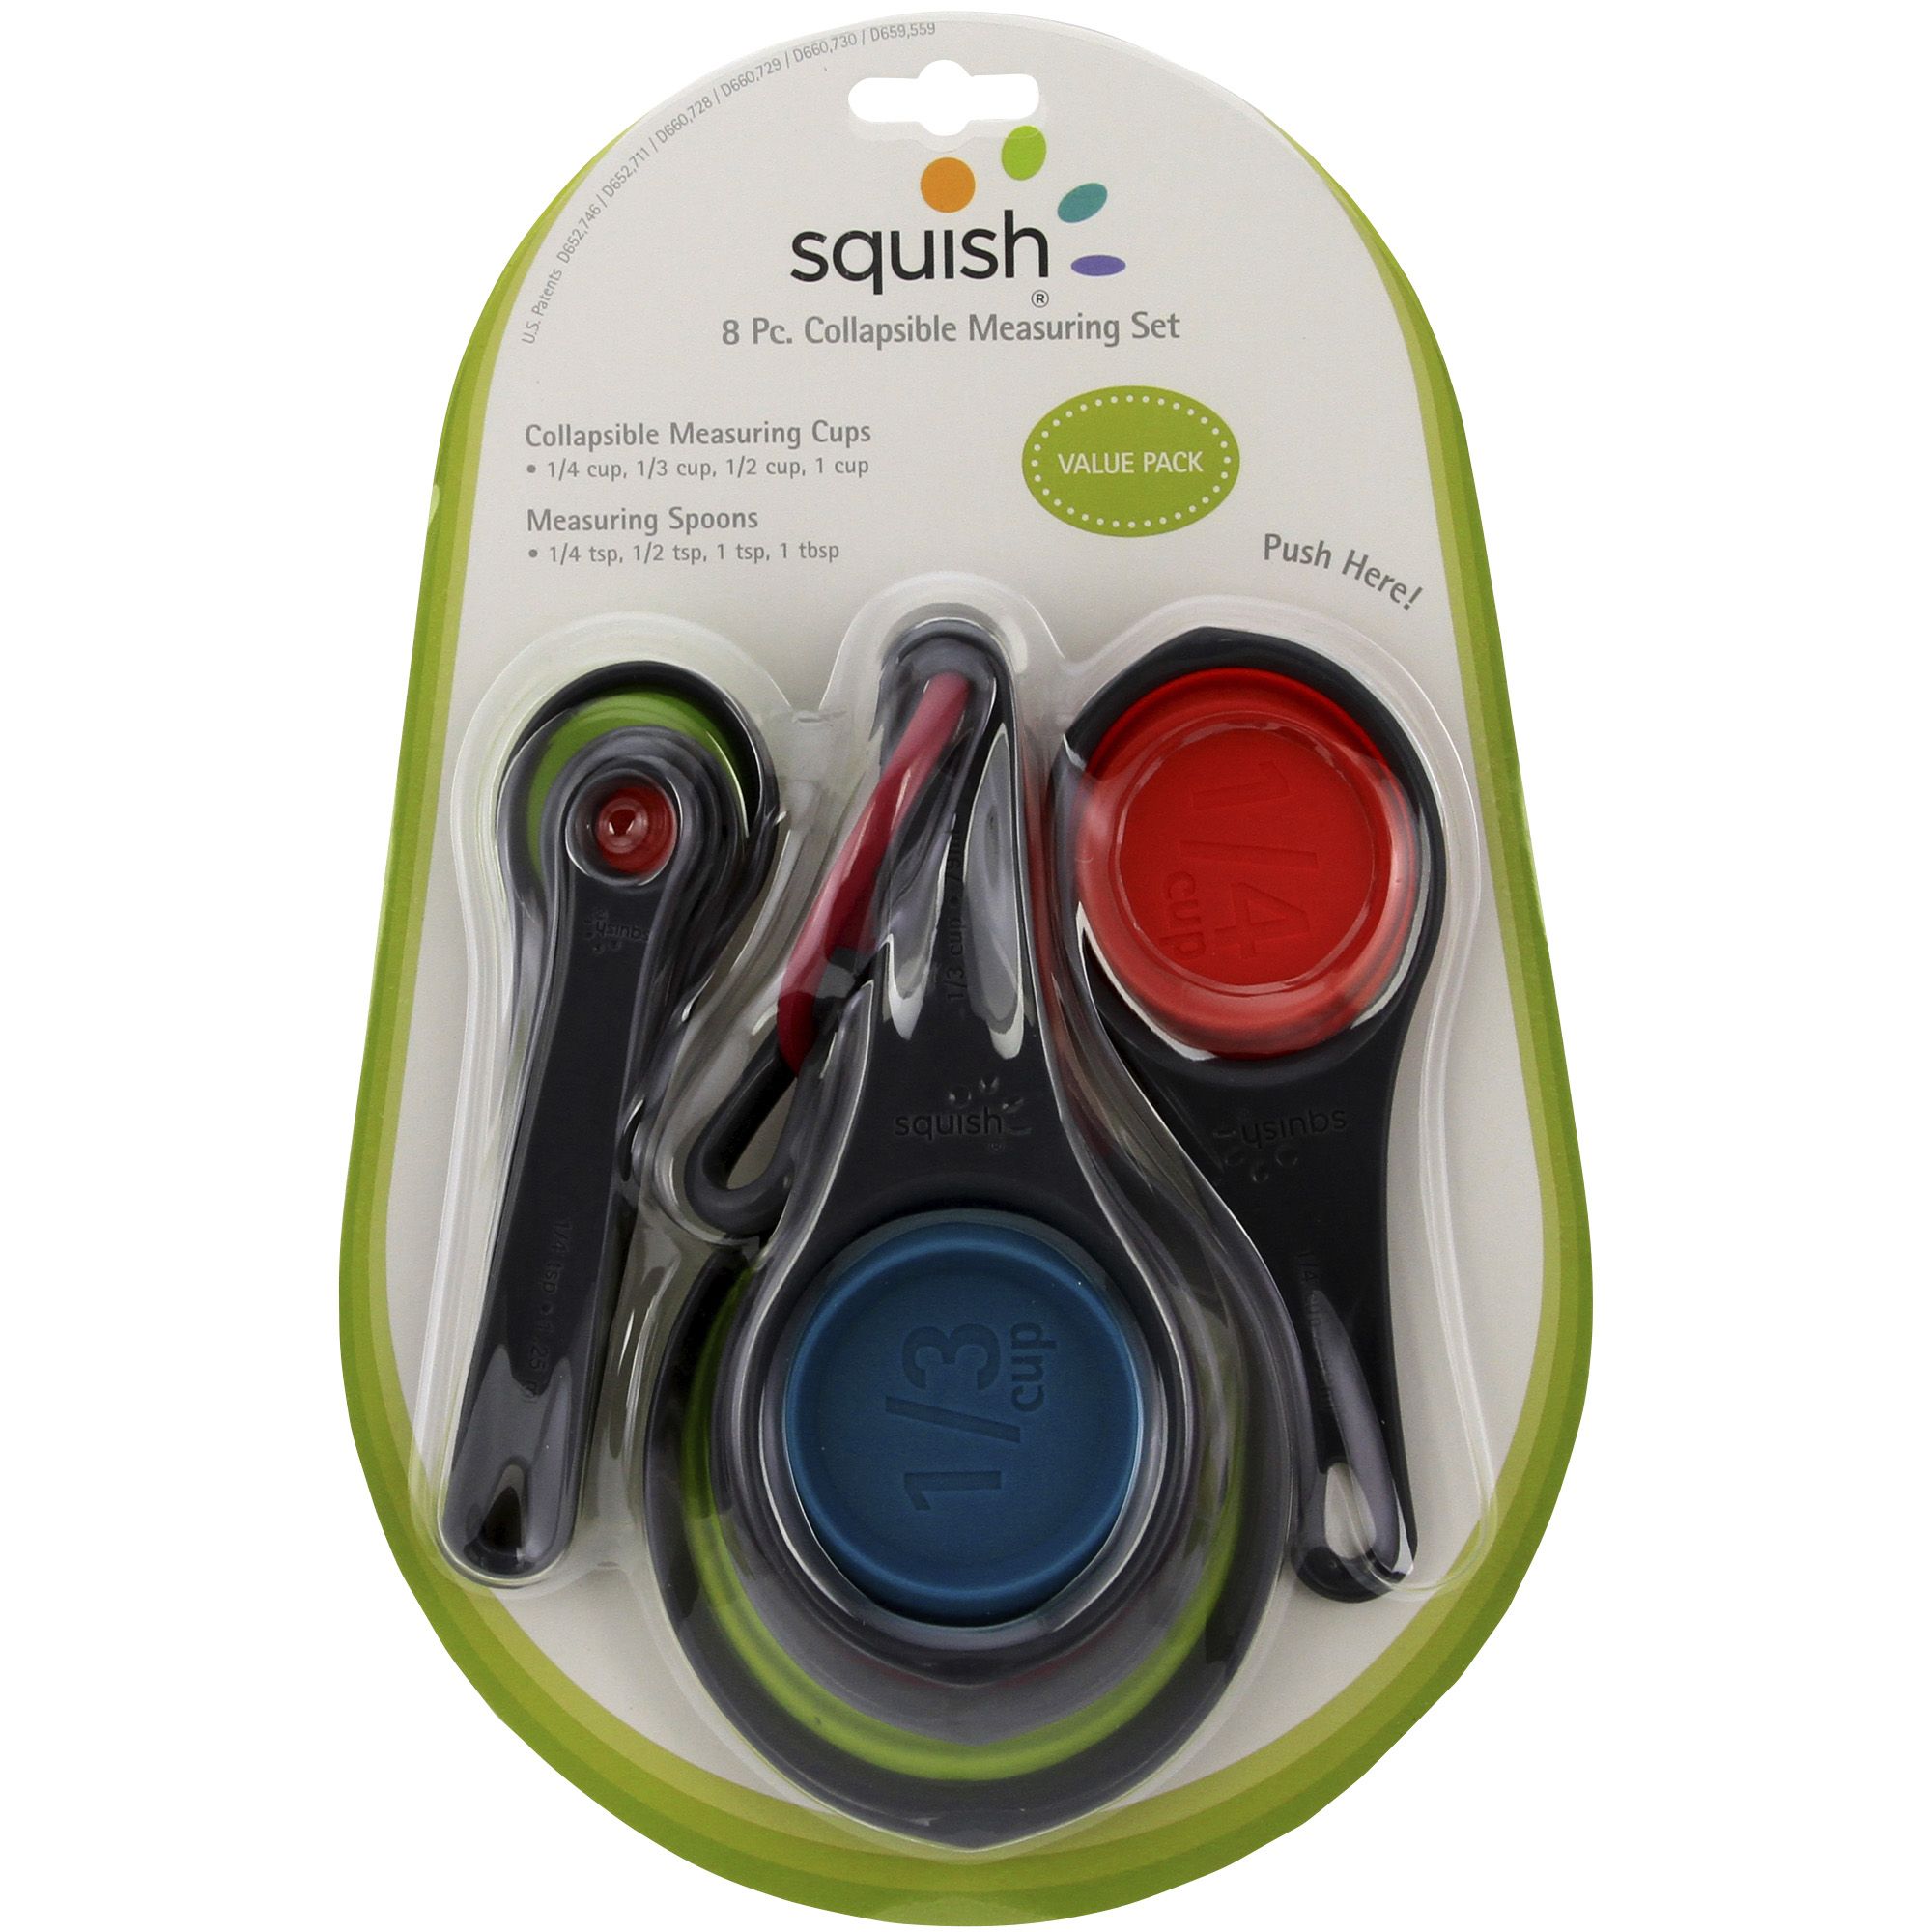 Fingerhut - Squish 8-Pc. Collapsible Measuring Cups and Spoons Set